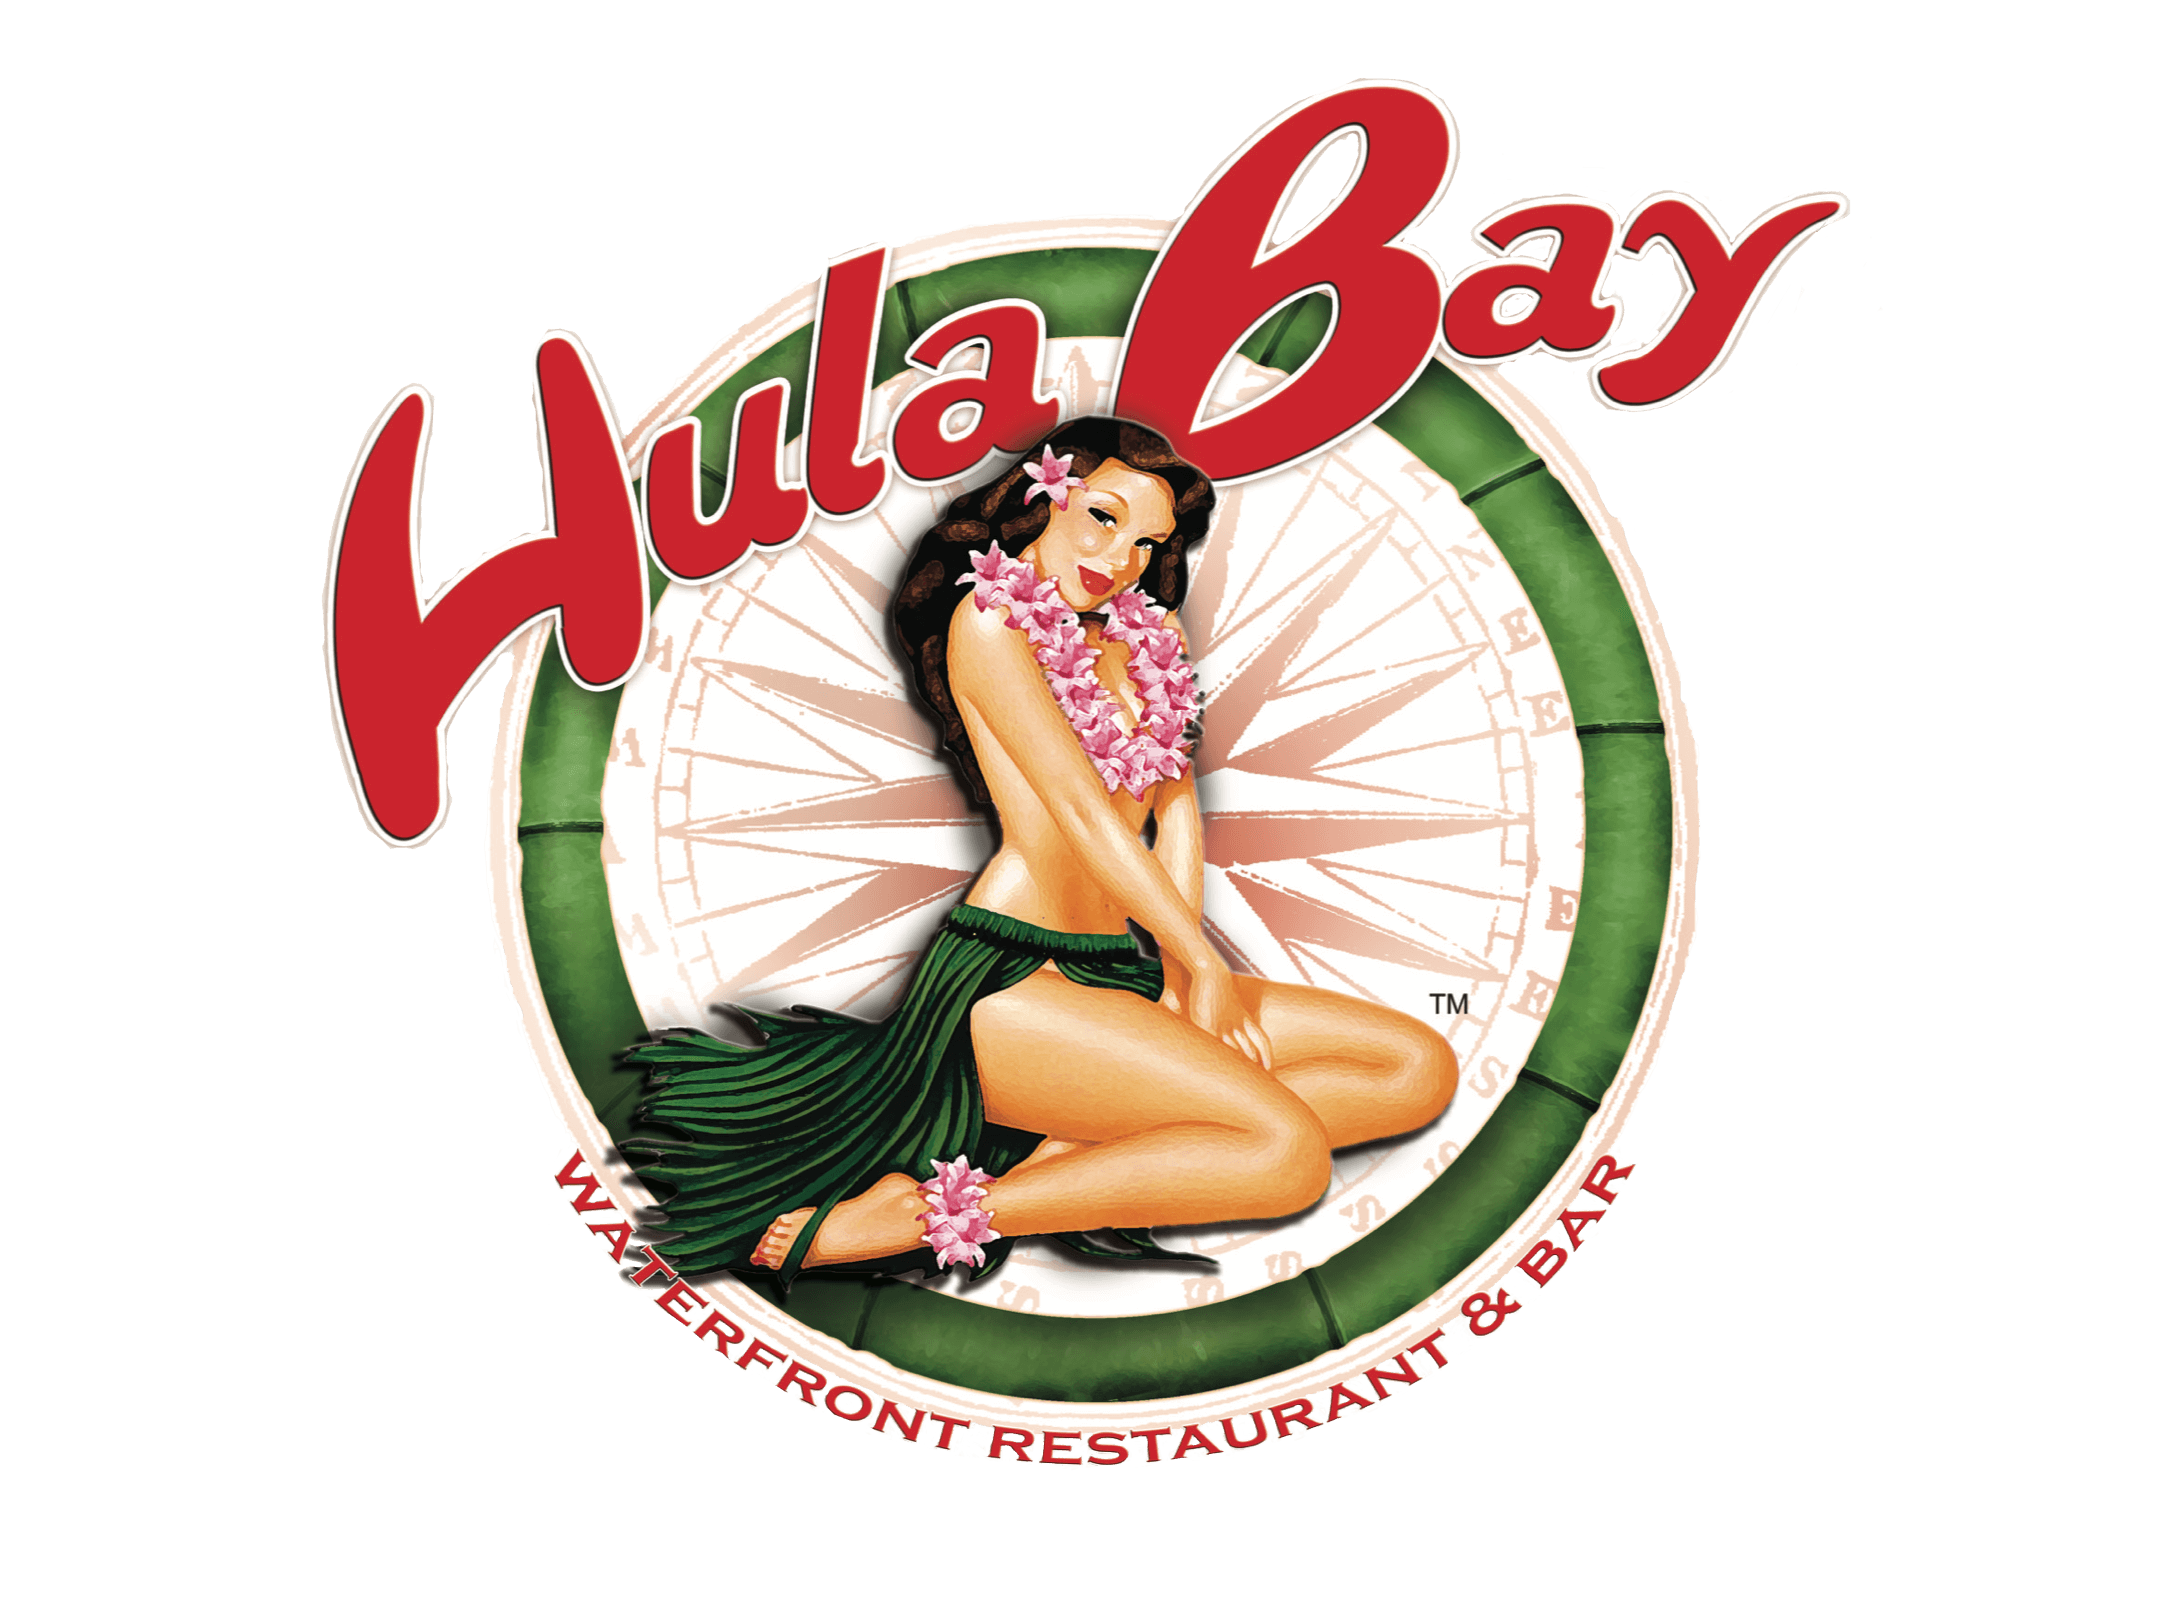 Hula Bay Club Tampa: Your Ultimate Waterfront Destination Guide